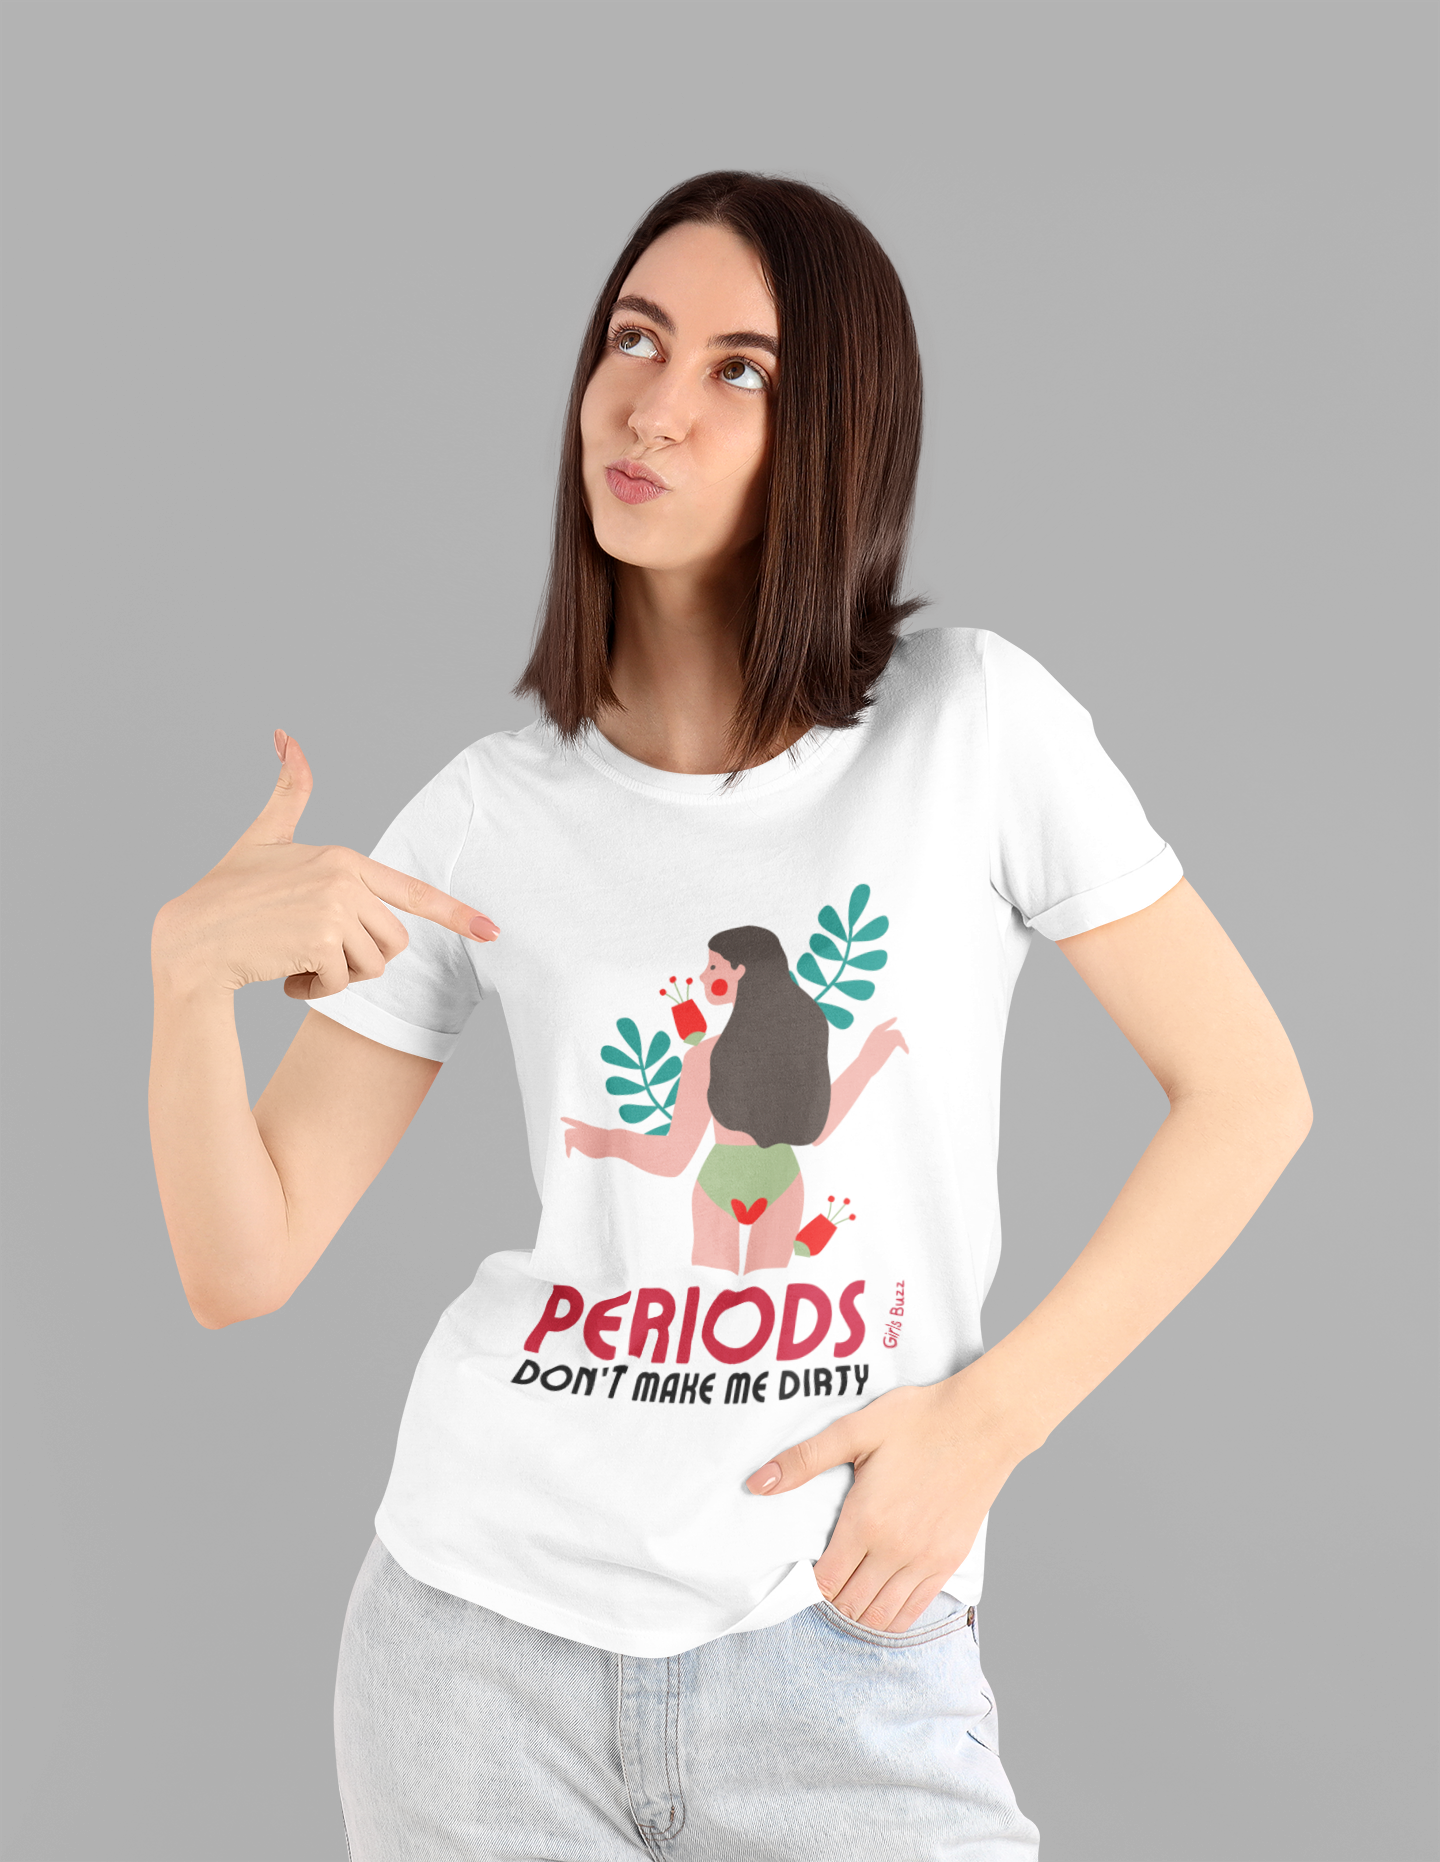 Normalize Periods